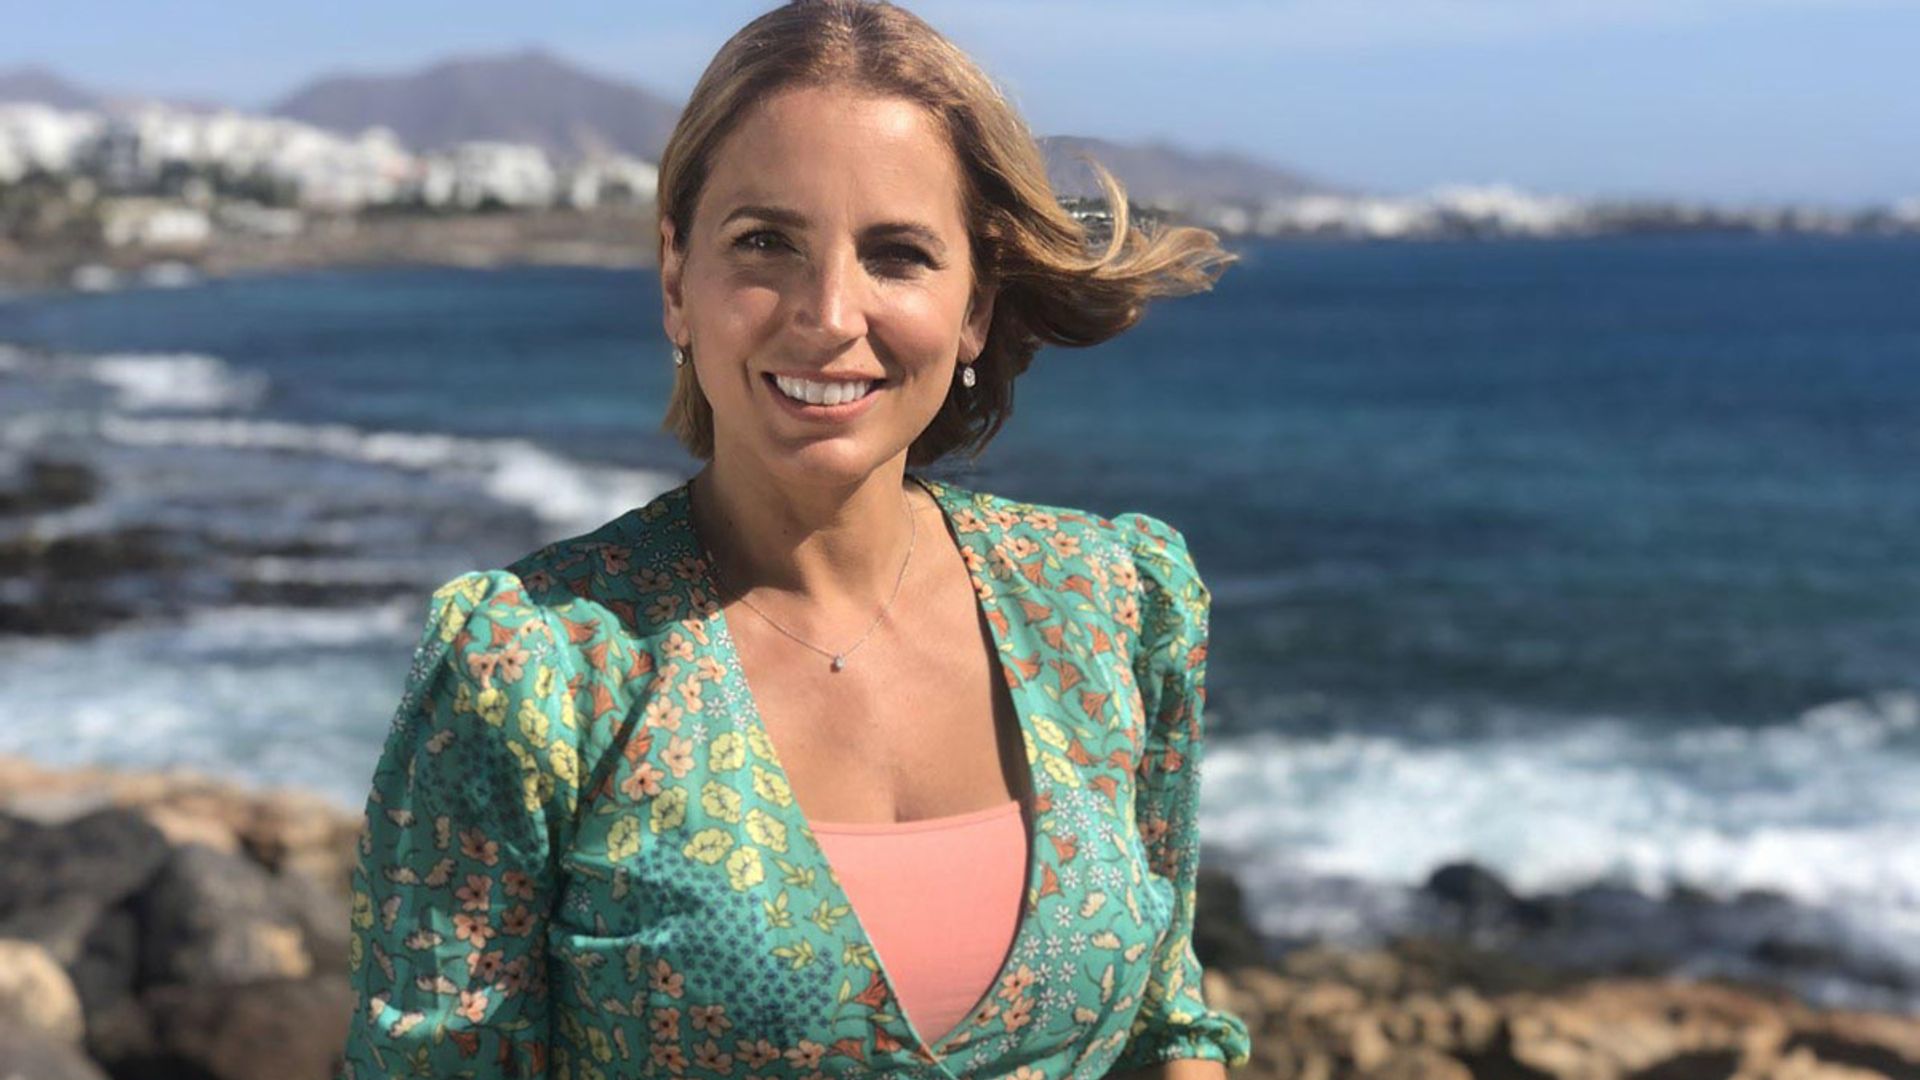 A Place in the Sun's Jasmine Harman shares incredible snap from early career